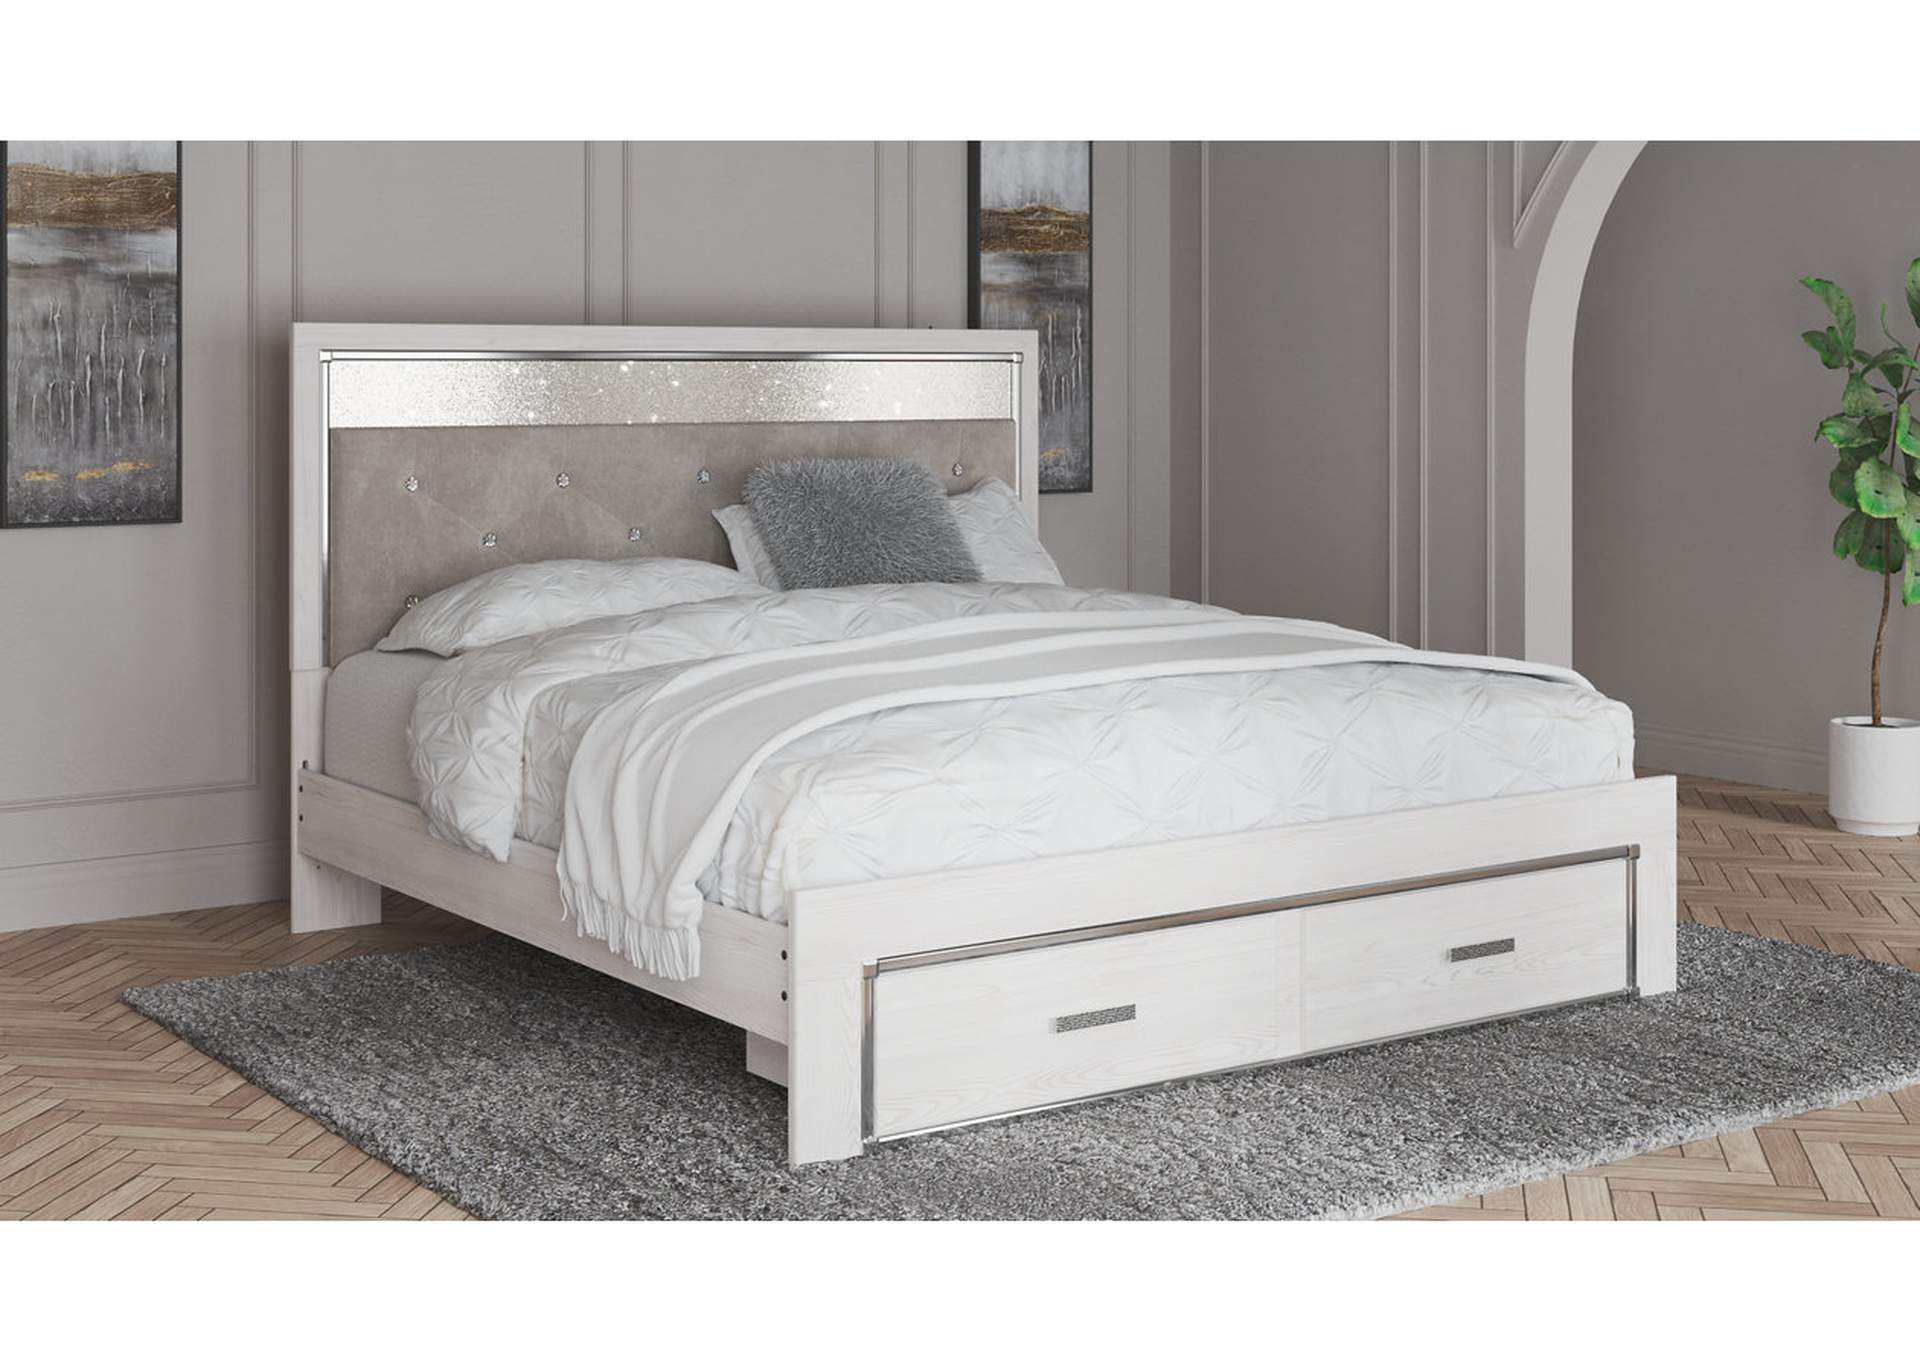 Altyra King Upholstered Storage Bed,Signature Design By Ashley